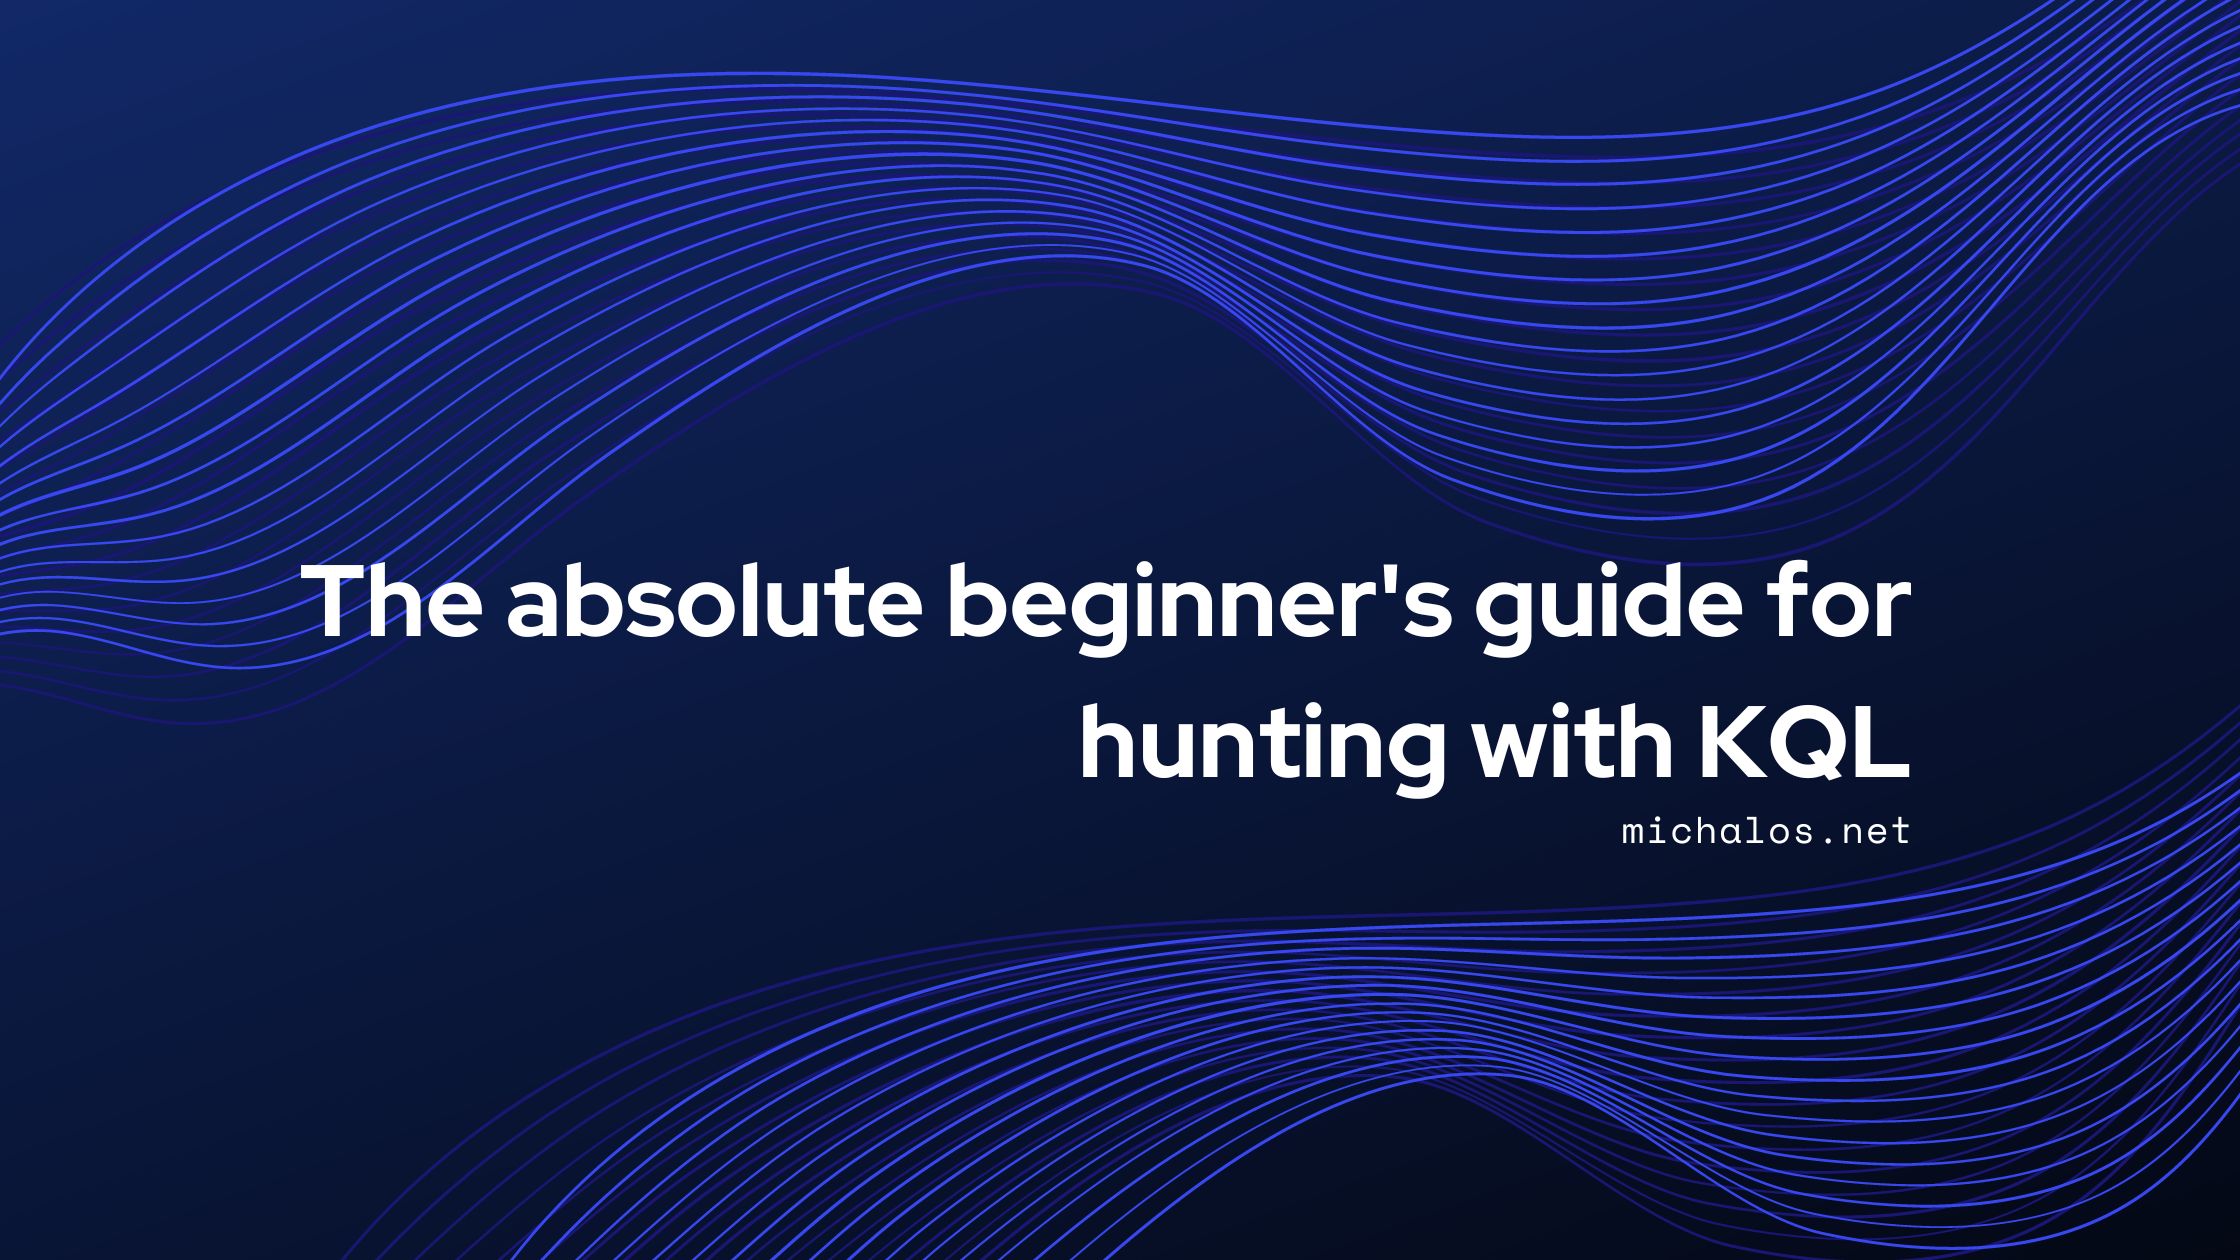 The absolute beginner’s guide for hunting with KQL